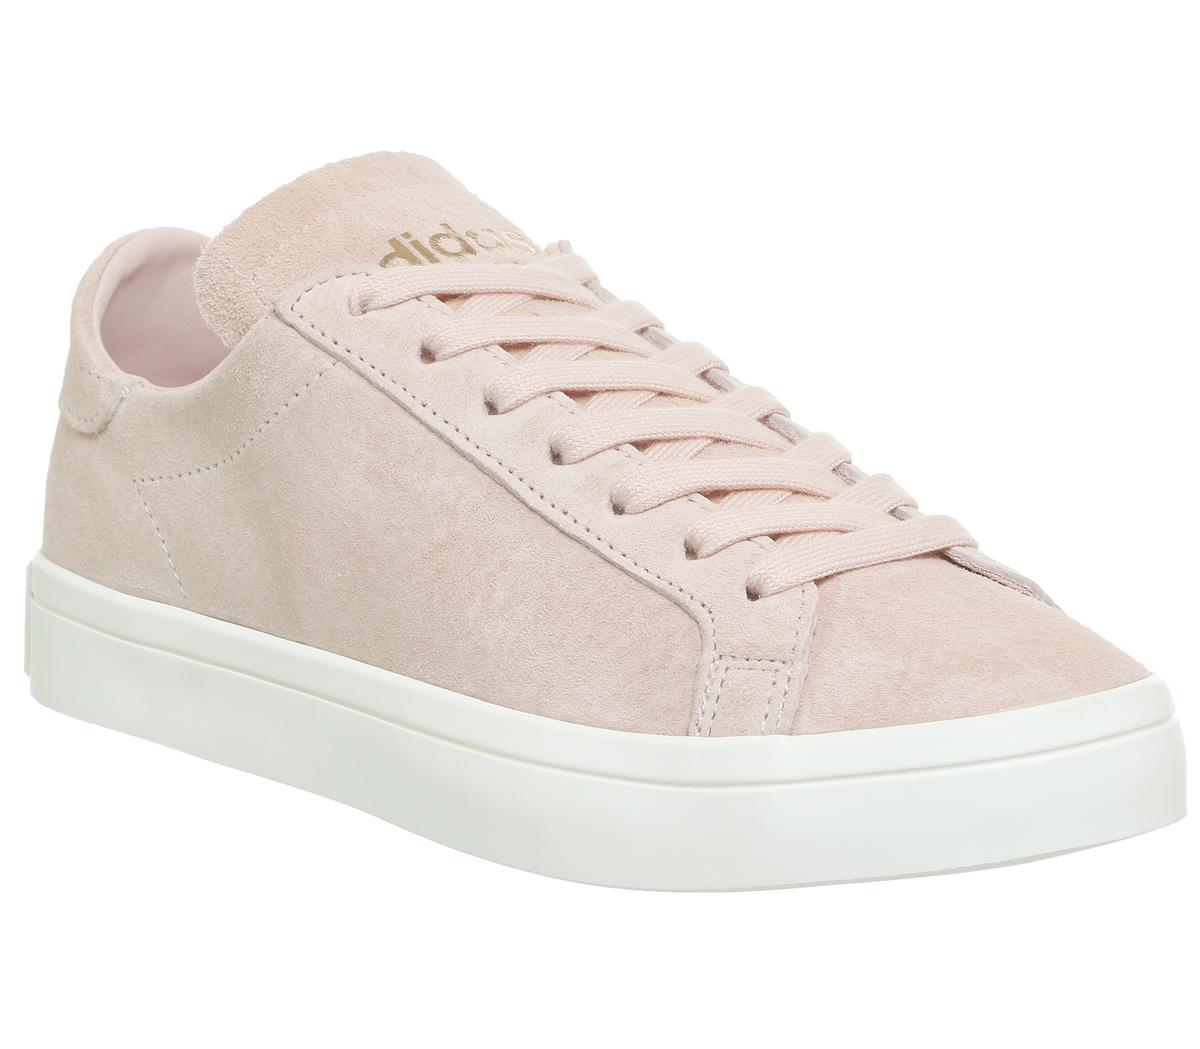 adidas Court Vantage Trainers Vapour Pink Off White - Hers trainers